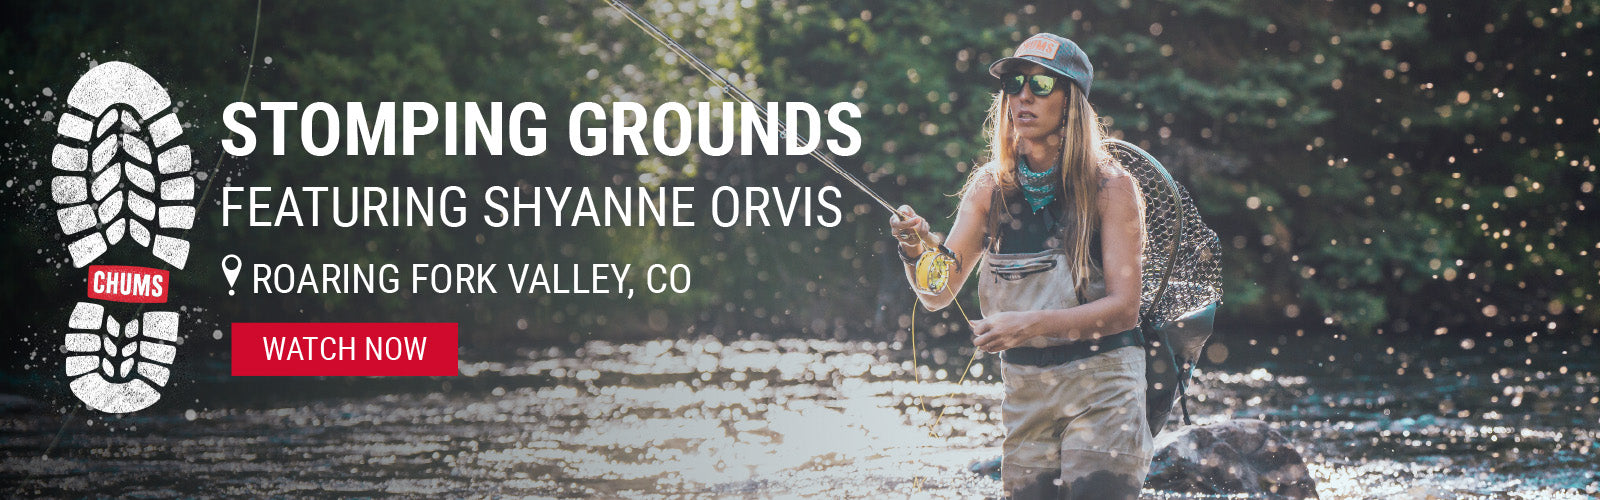 Stomping Grounds Featuring Shyanne Orvis - Roaring Fork Valley, CO - Watch Now